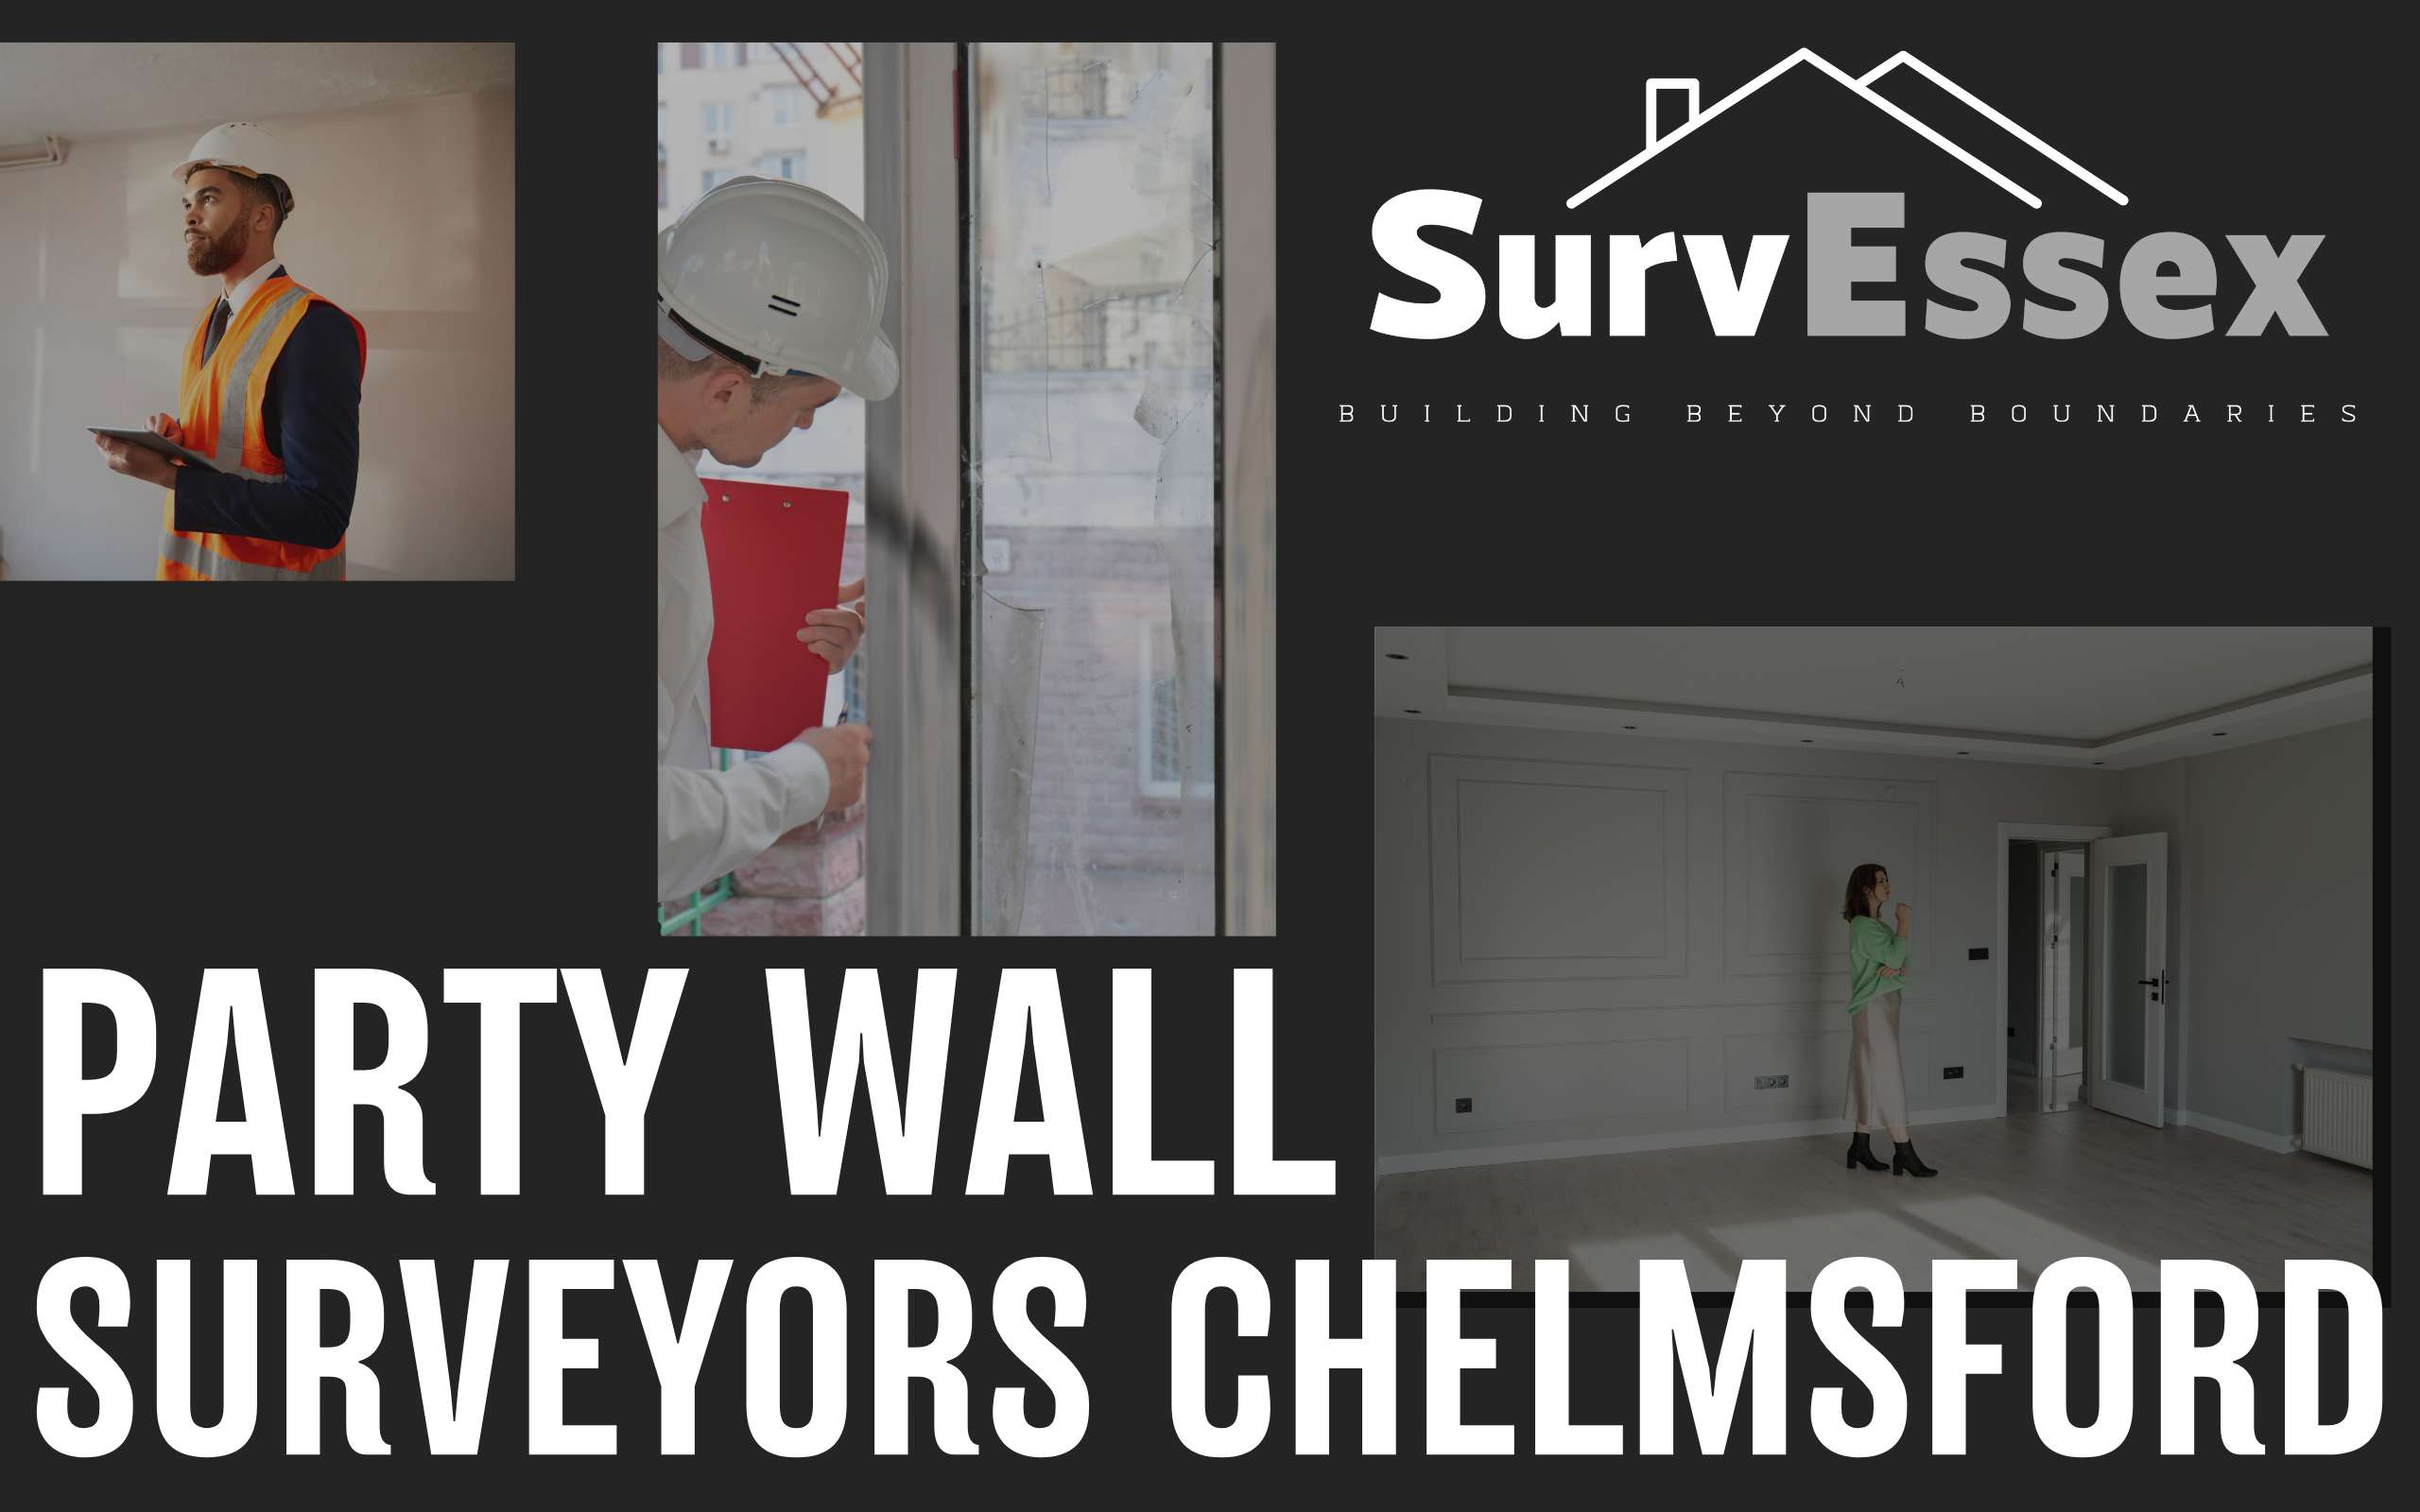 Party Wall Surveyor Chelmsford